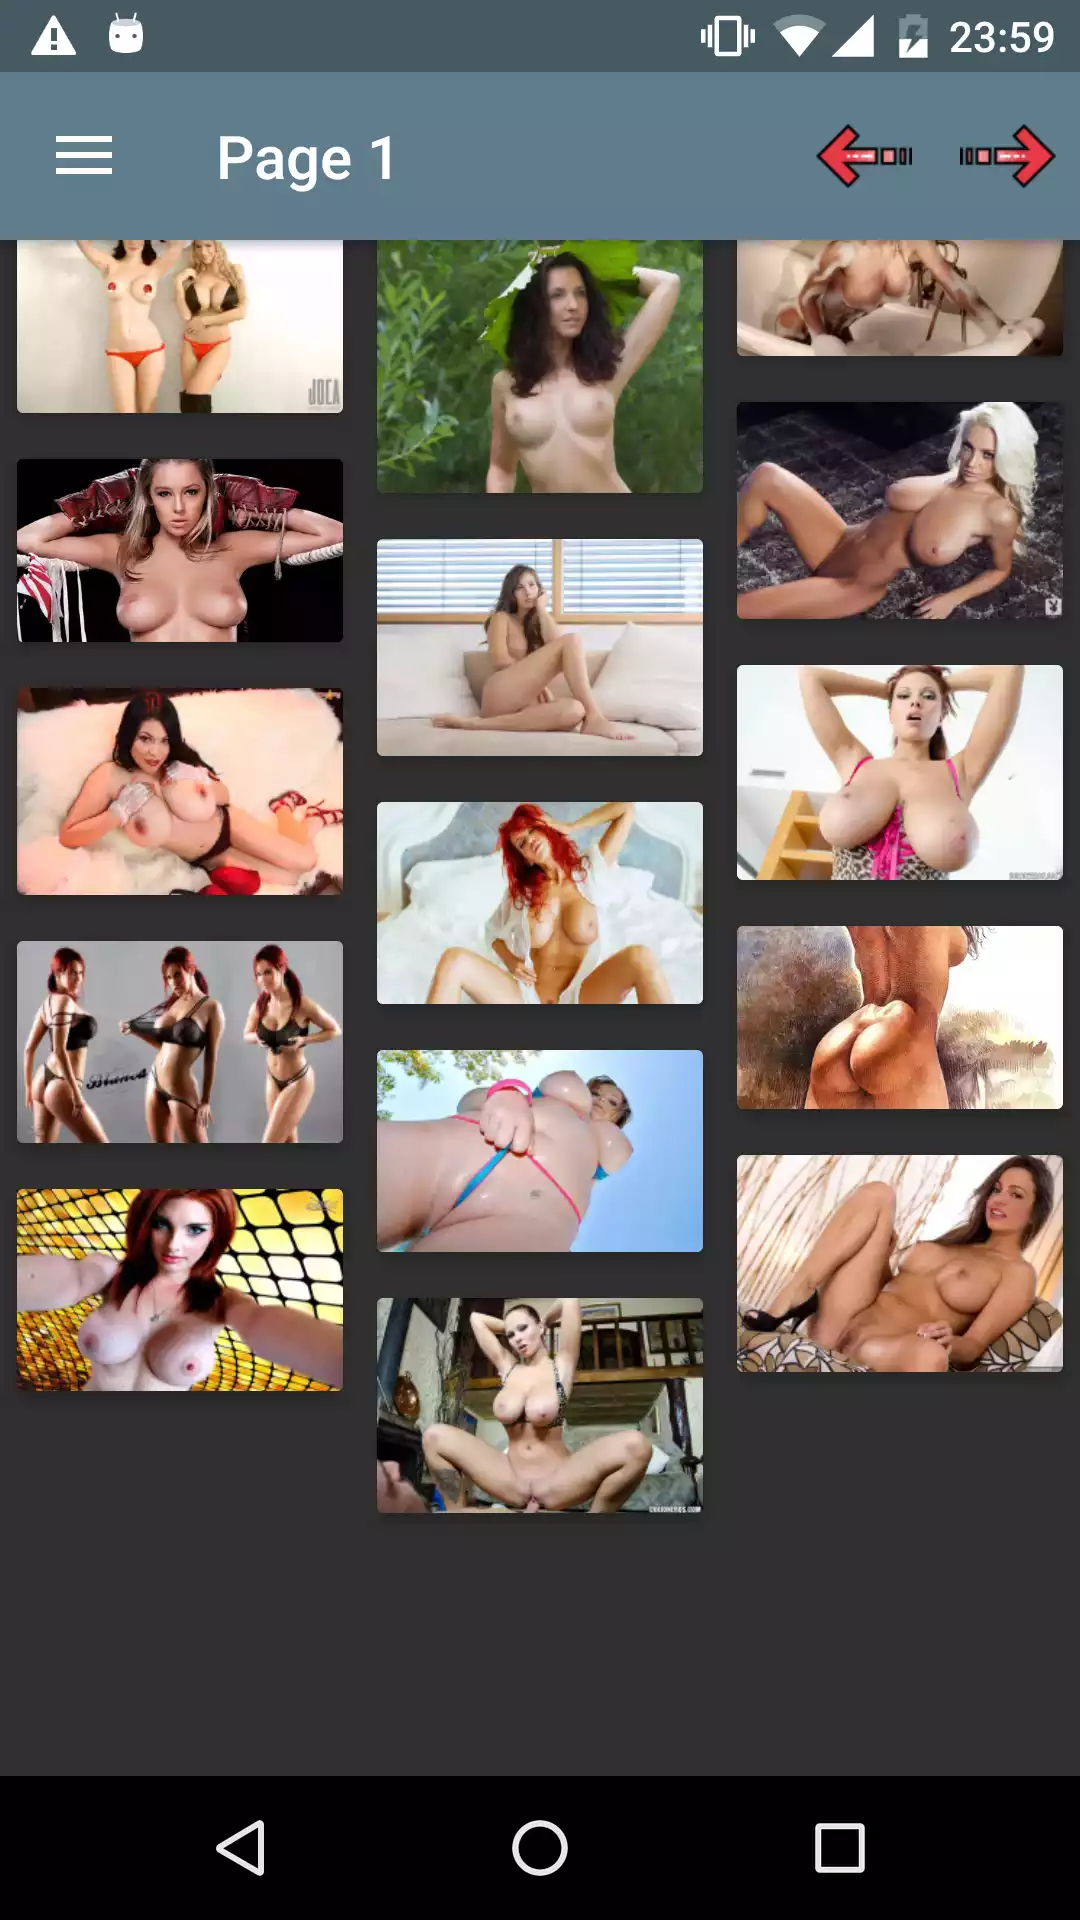 Big tits Walls apk,henti,gallery,download,hentai,sexygalleries,pice,apps,backgrounds,hot,photos,sexy,pics,futanari,erotic,henati,wallpapers,girls,porn,hentia,android,updates